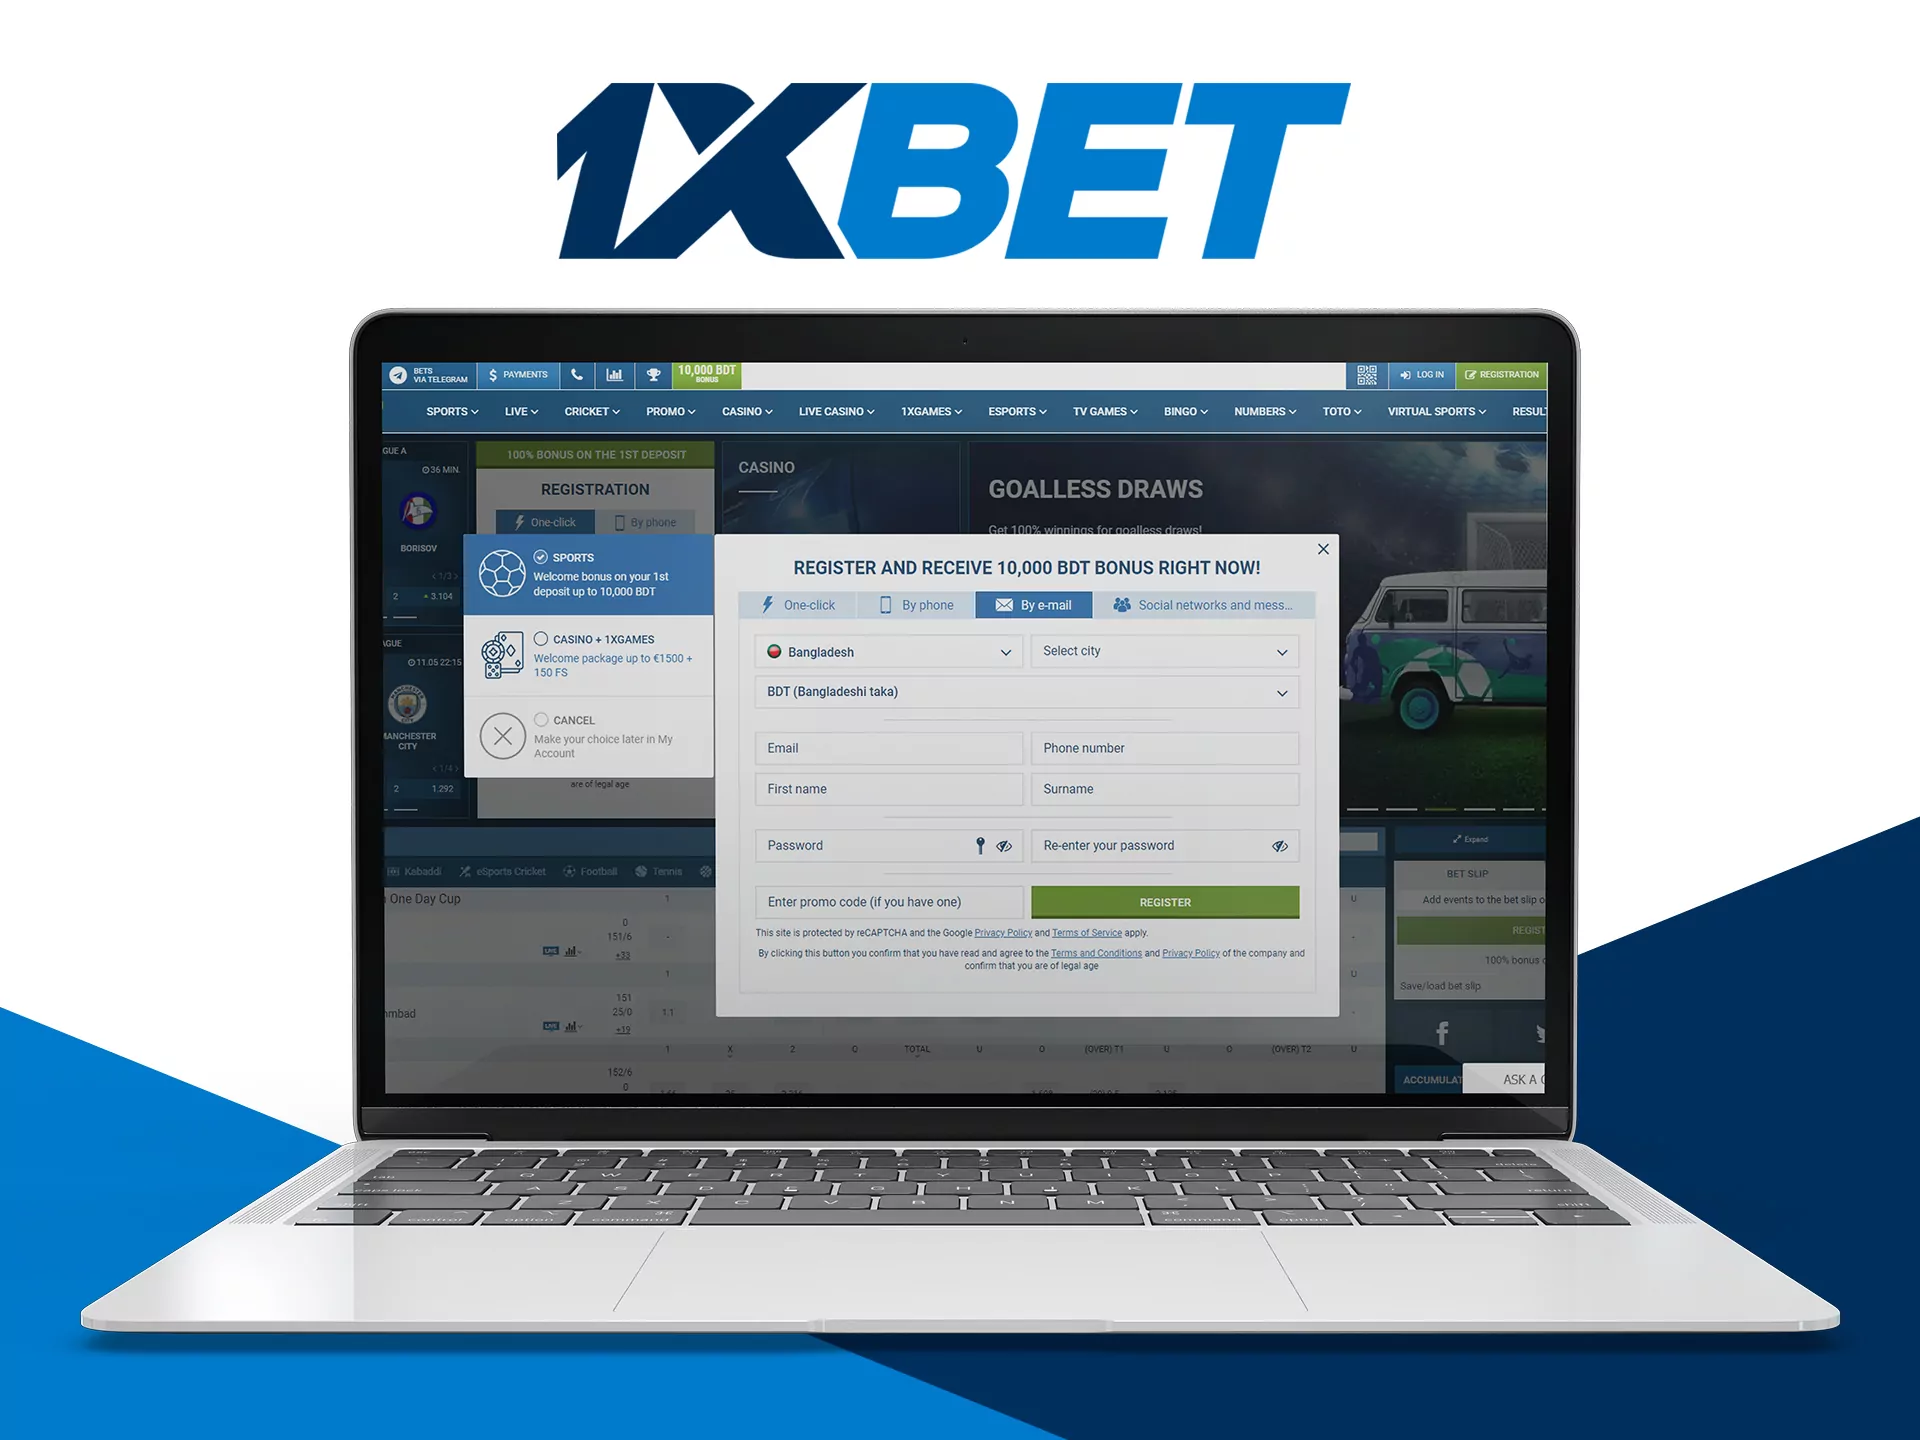 1xbet registration – step-by-step instruction.